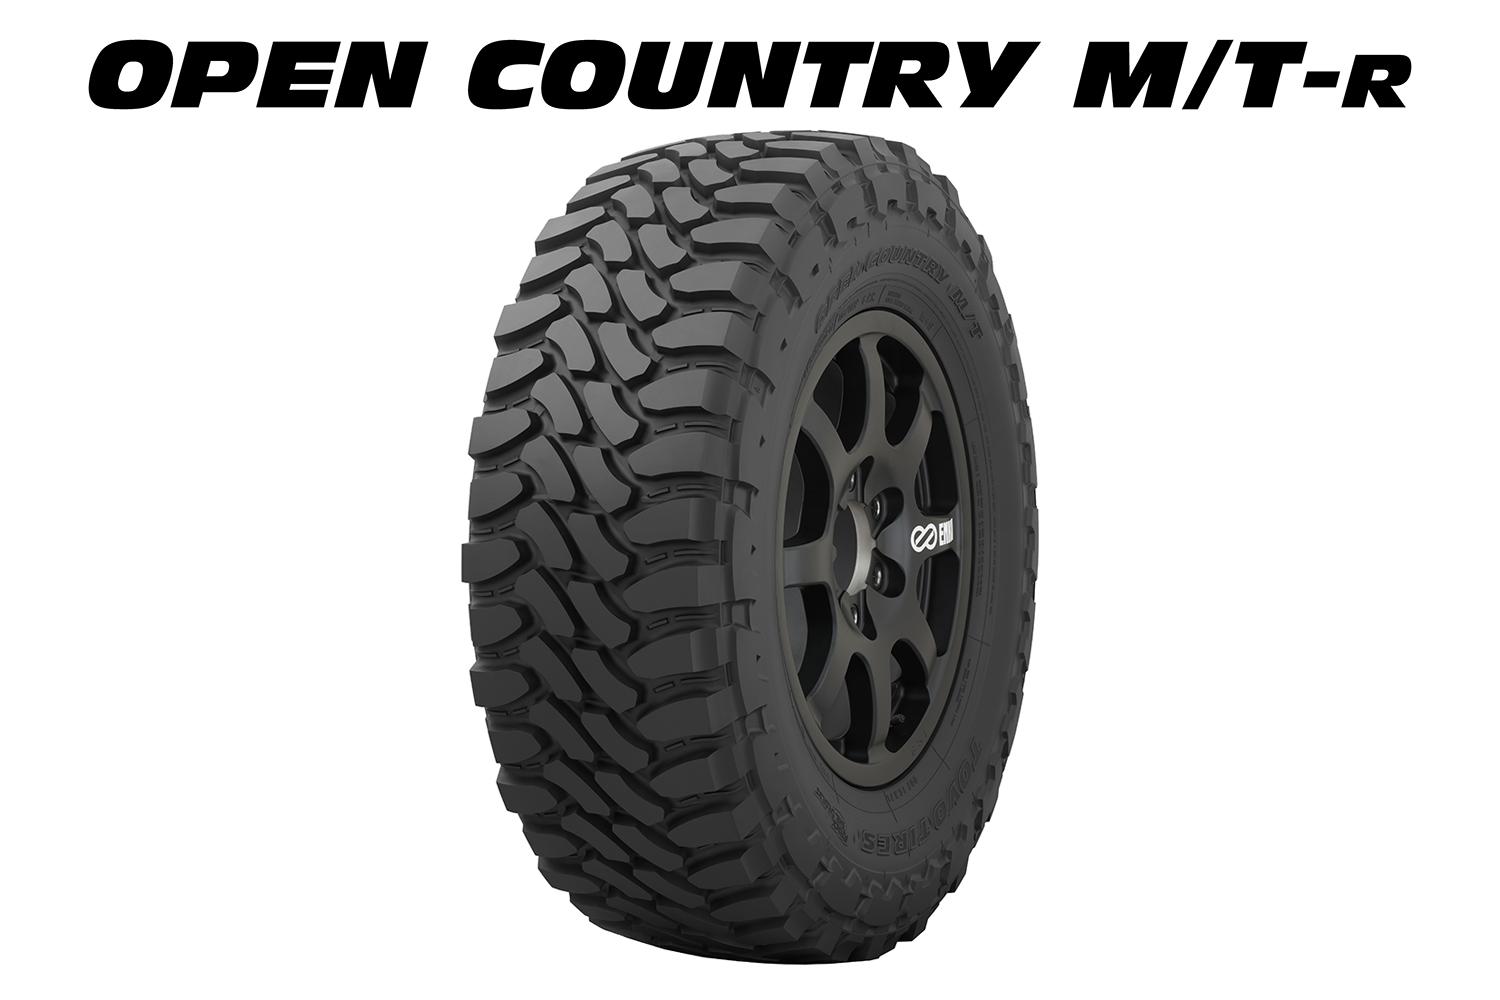 opencountry_mtr_main